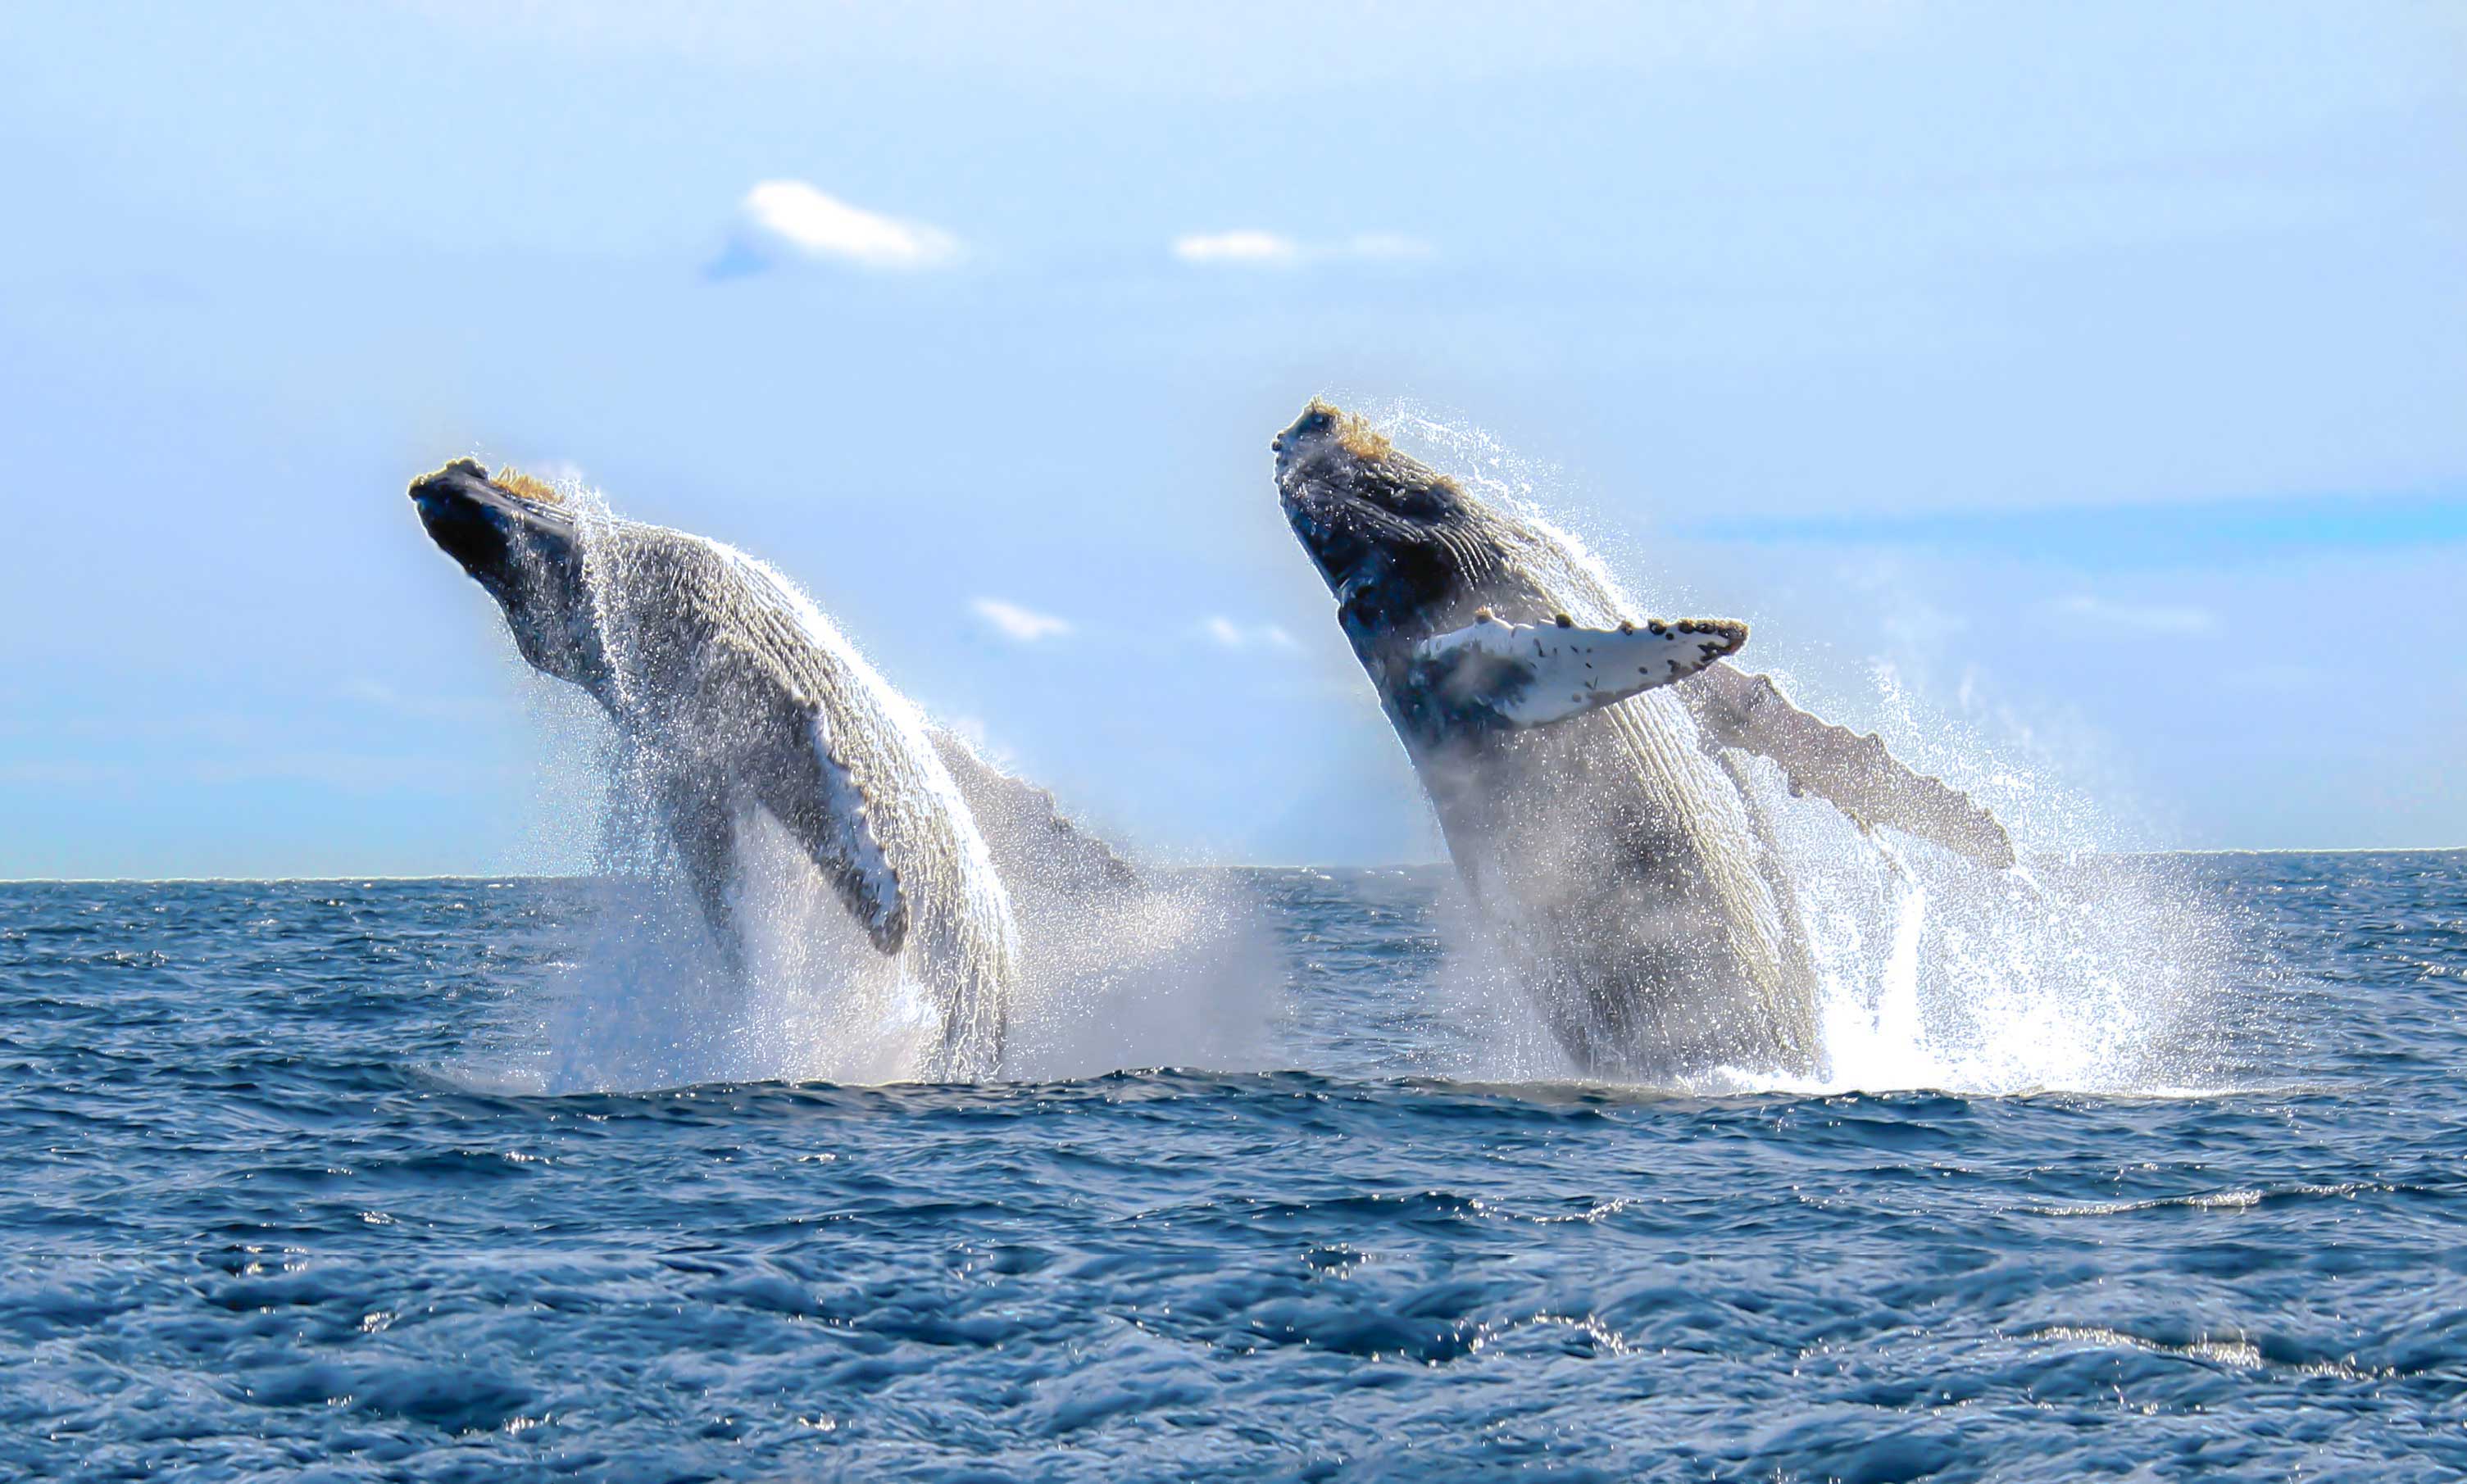 Whales jumping